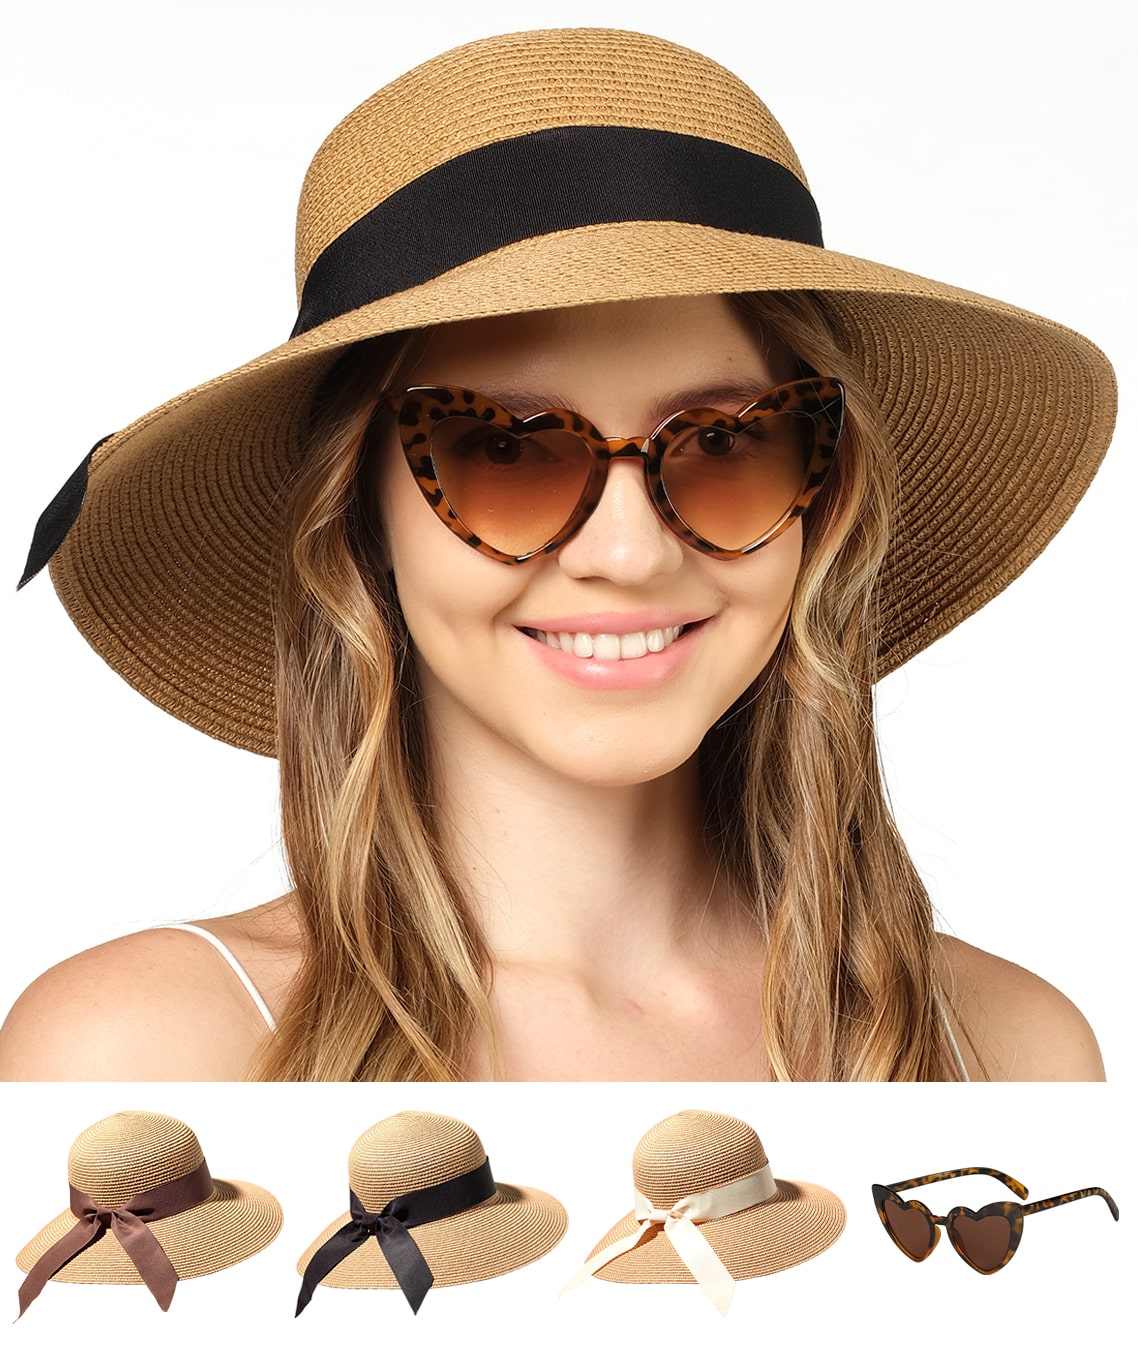 FUNCREDIBLE Wide Brim Sun Hats for Women - Floppy Straw Hat with Heart  Shape Glasses - Foldable Large Summer Hat - Big Roll Up Beach Cap - UPF 50+  (